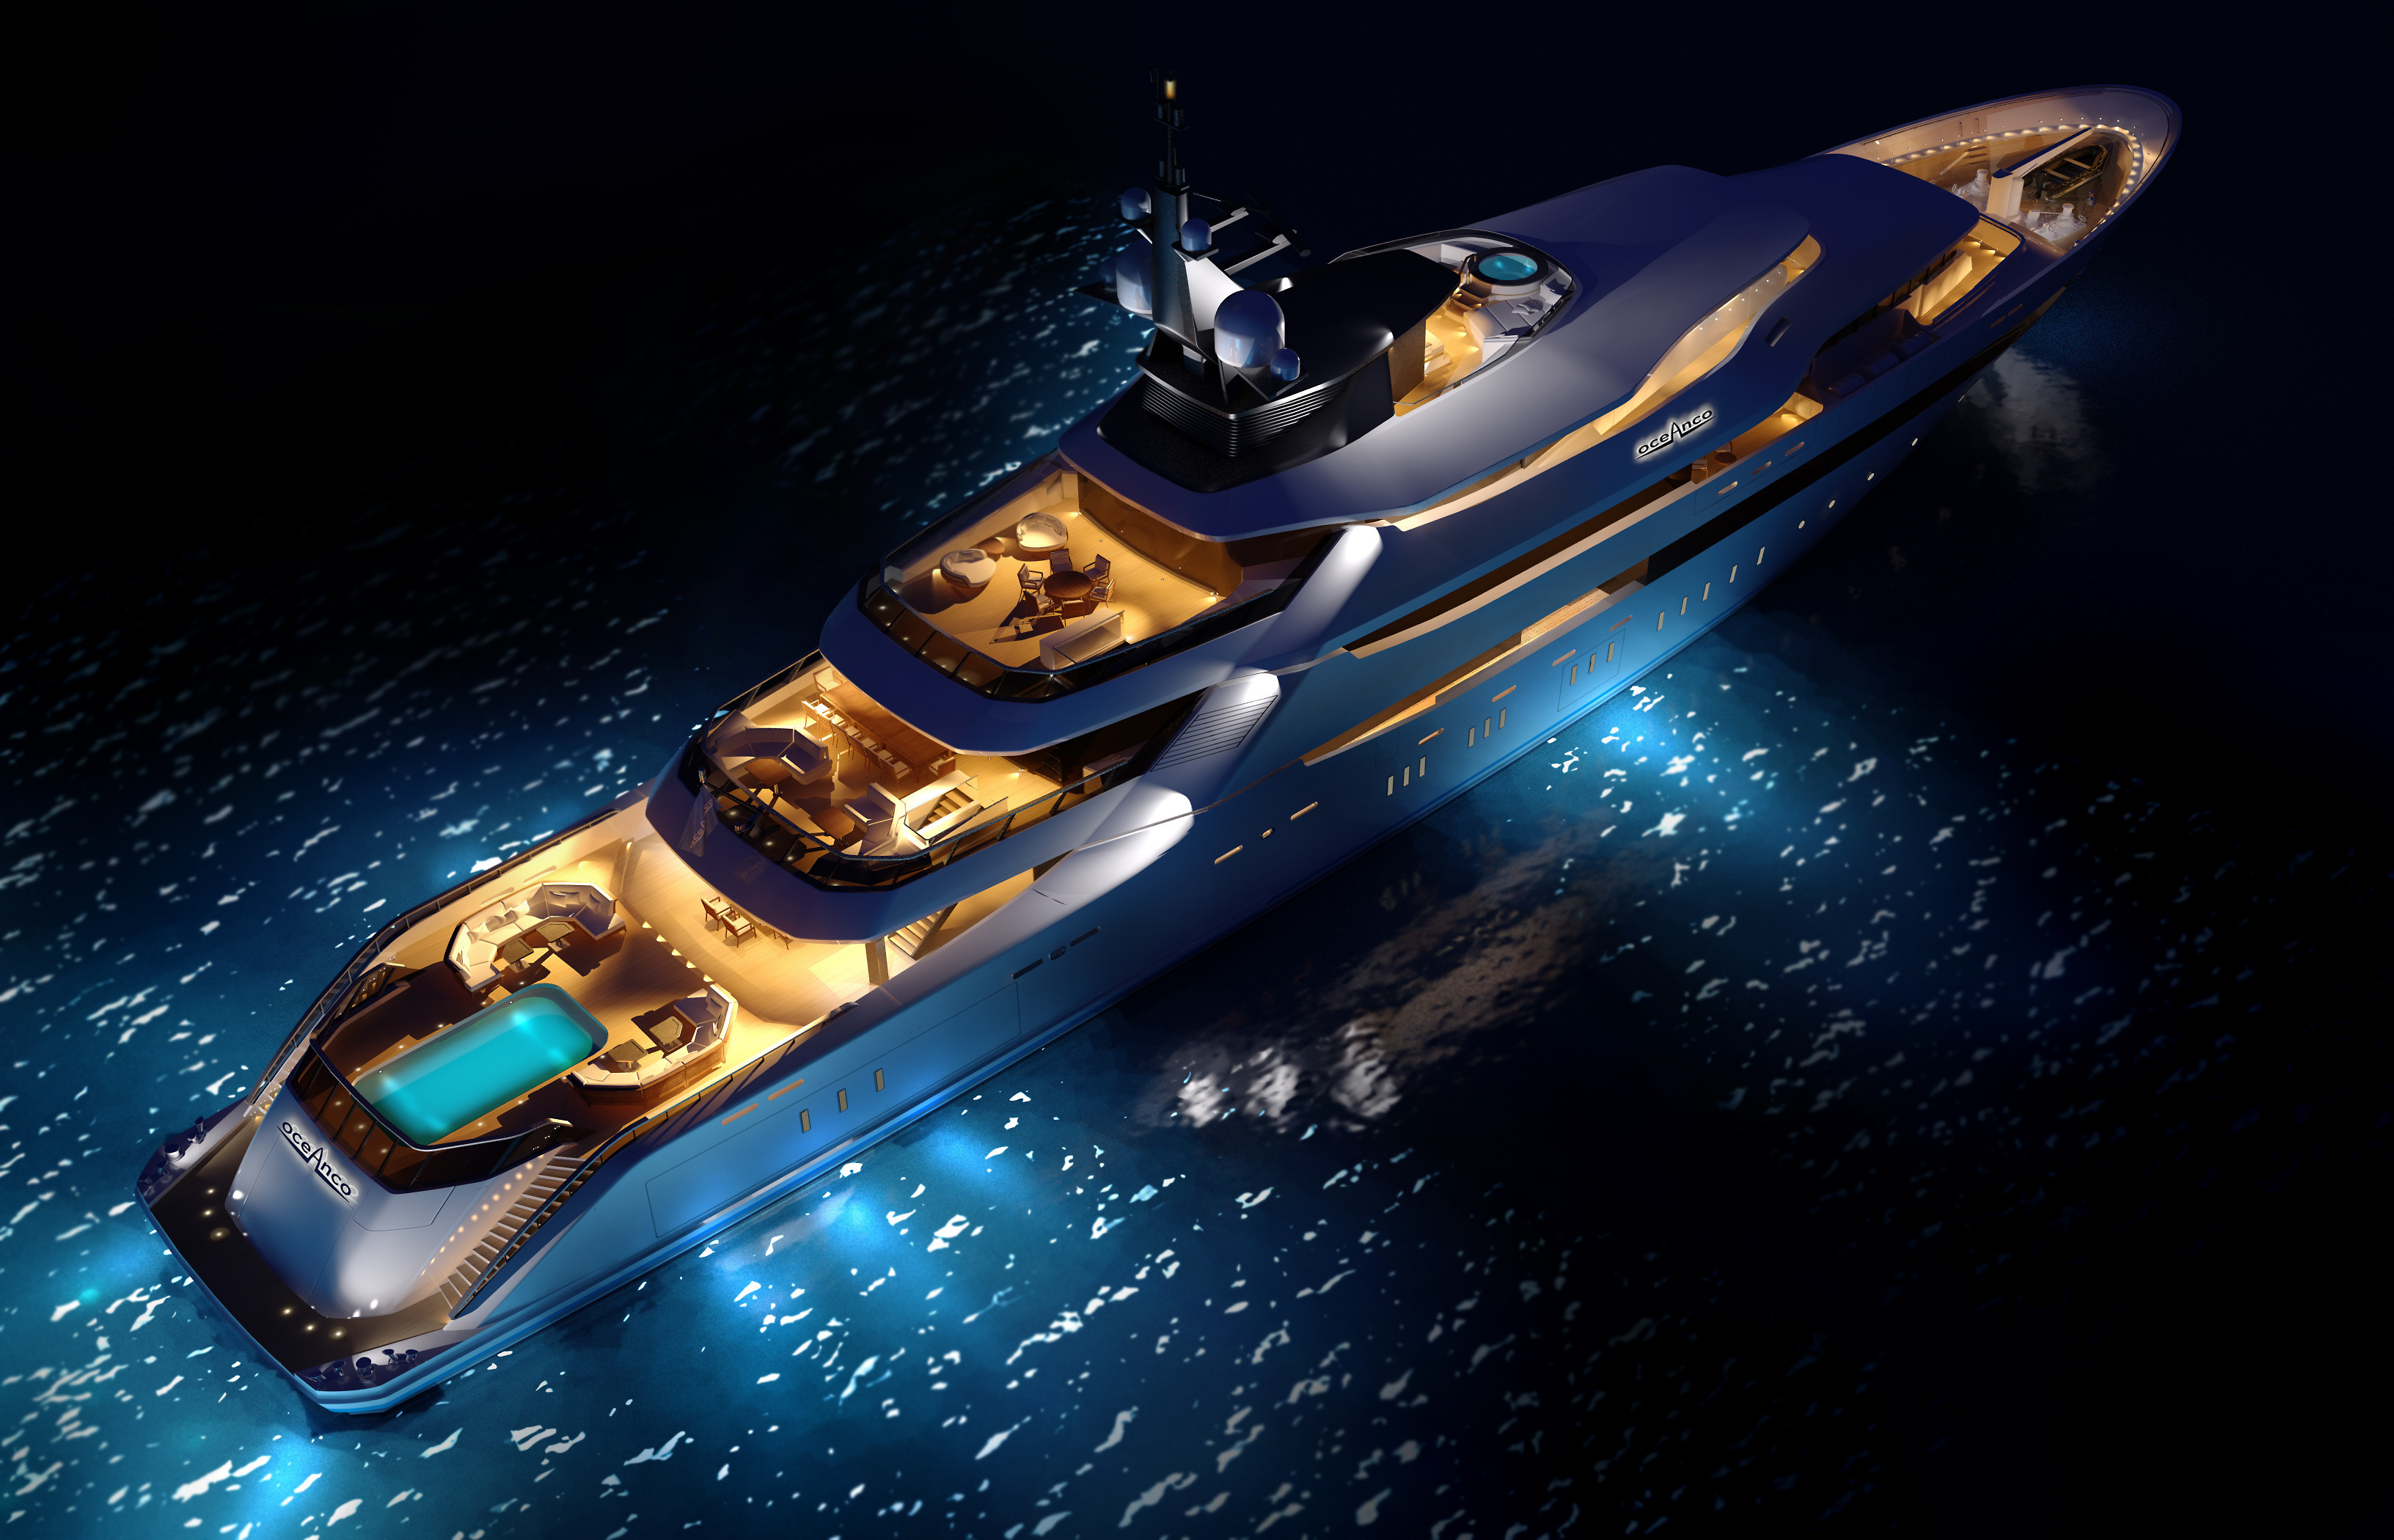 80192 download wallpaper miscellanea, miscellaneous, concept, yacht, luxury screensavers and pictures for free